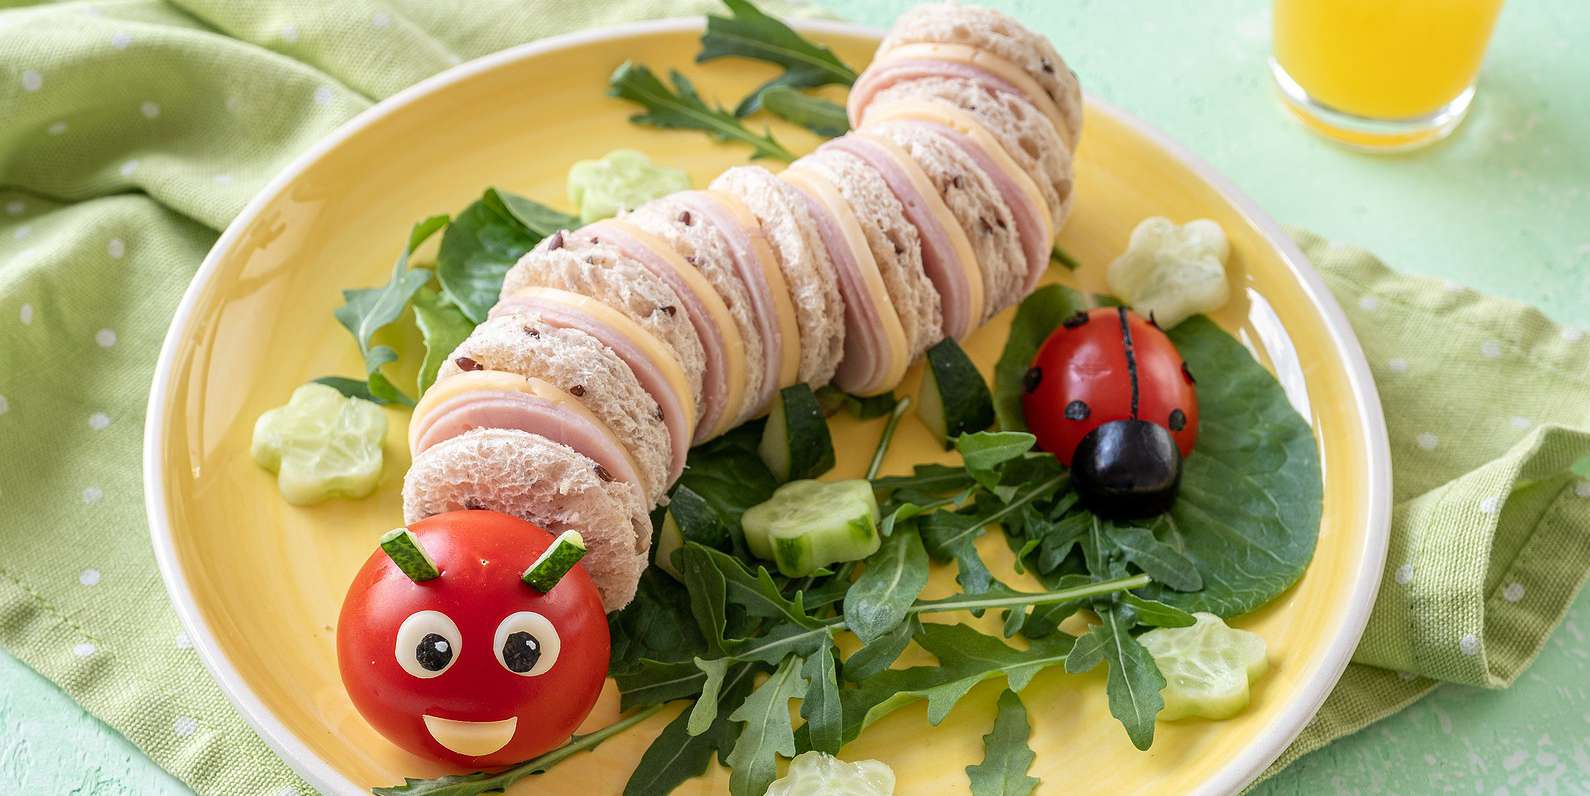 The Very Healthy Caterpillars